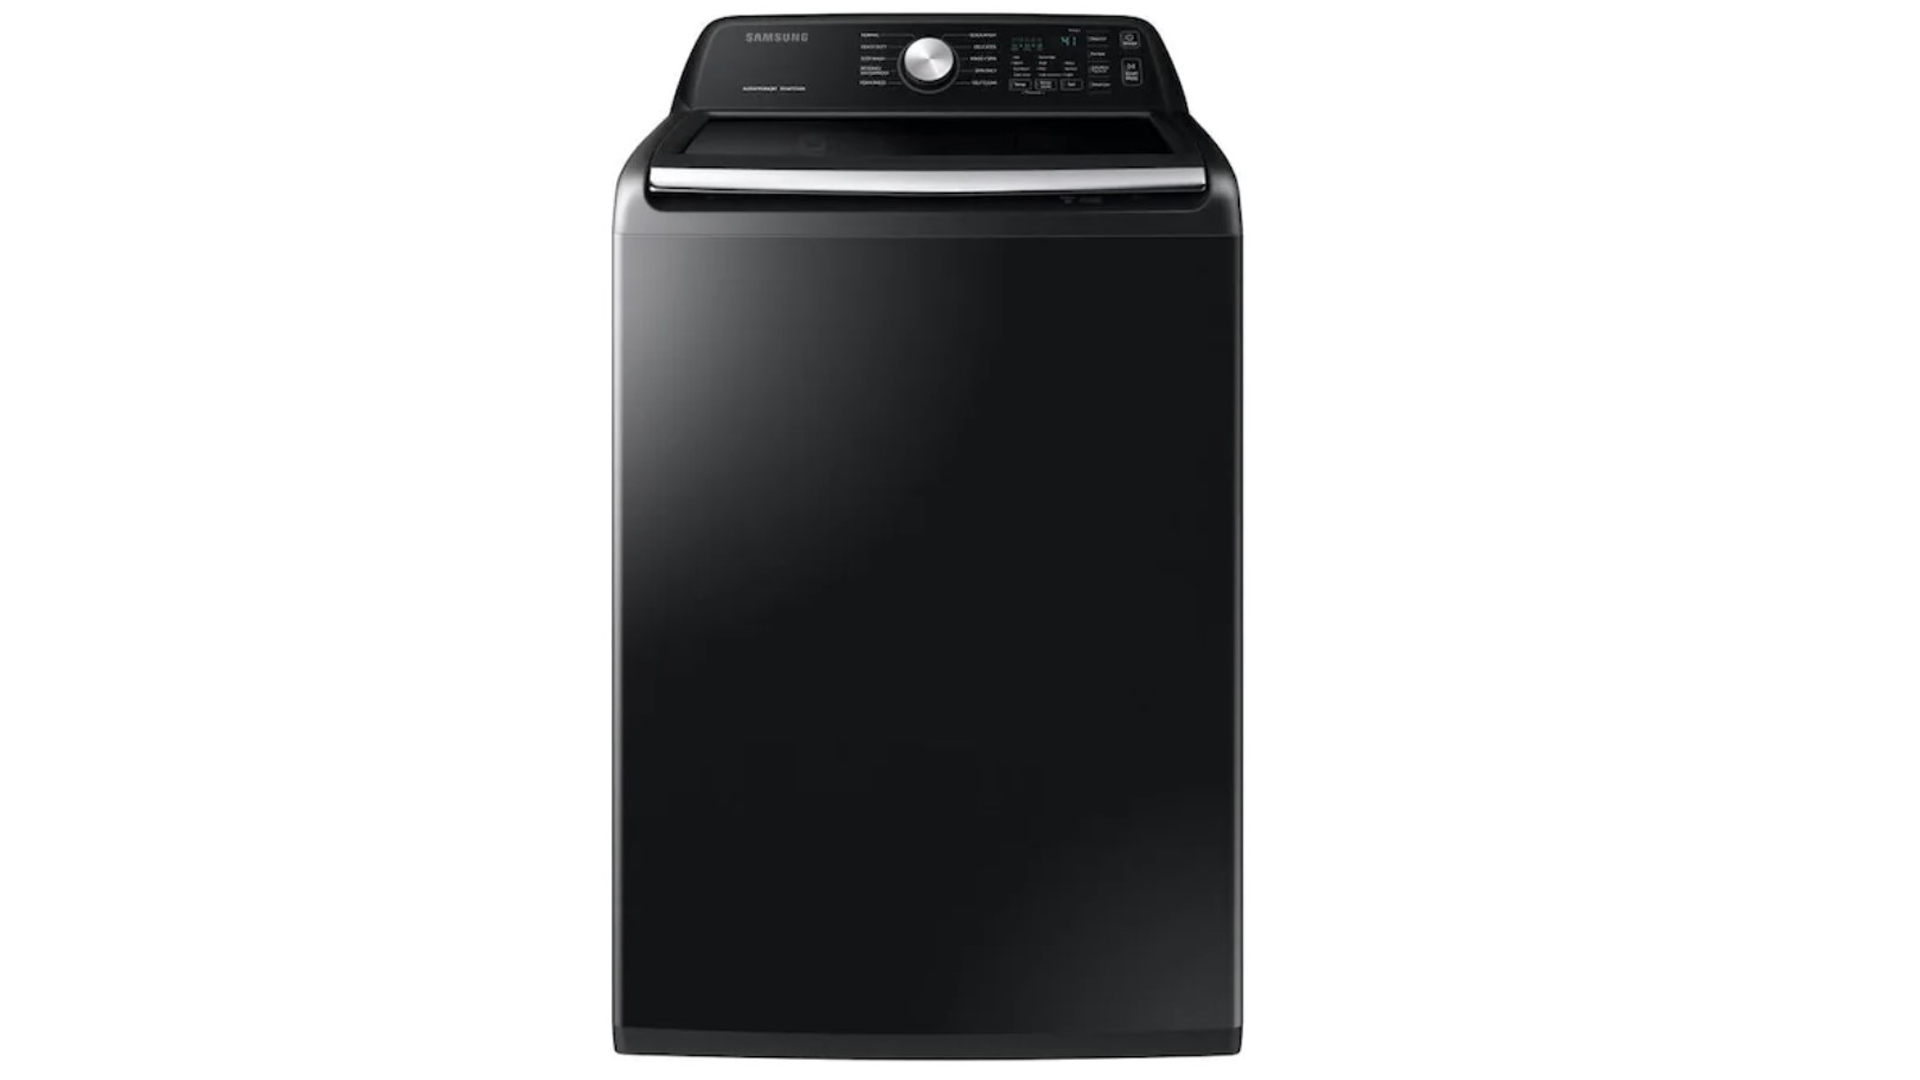 Best top load washers: Samsung WA45T3400AV washer review